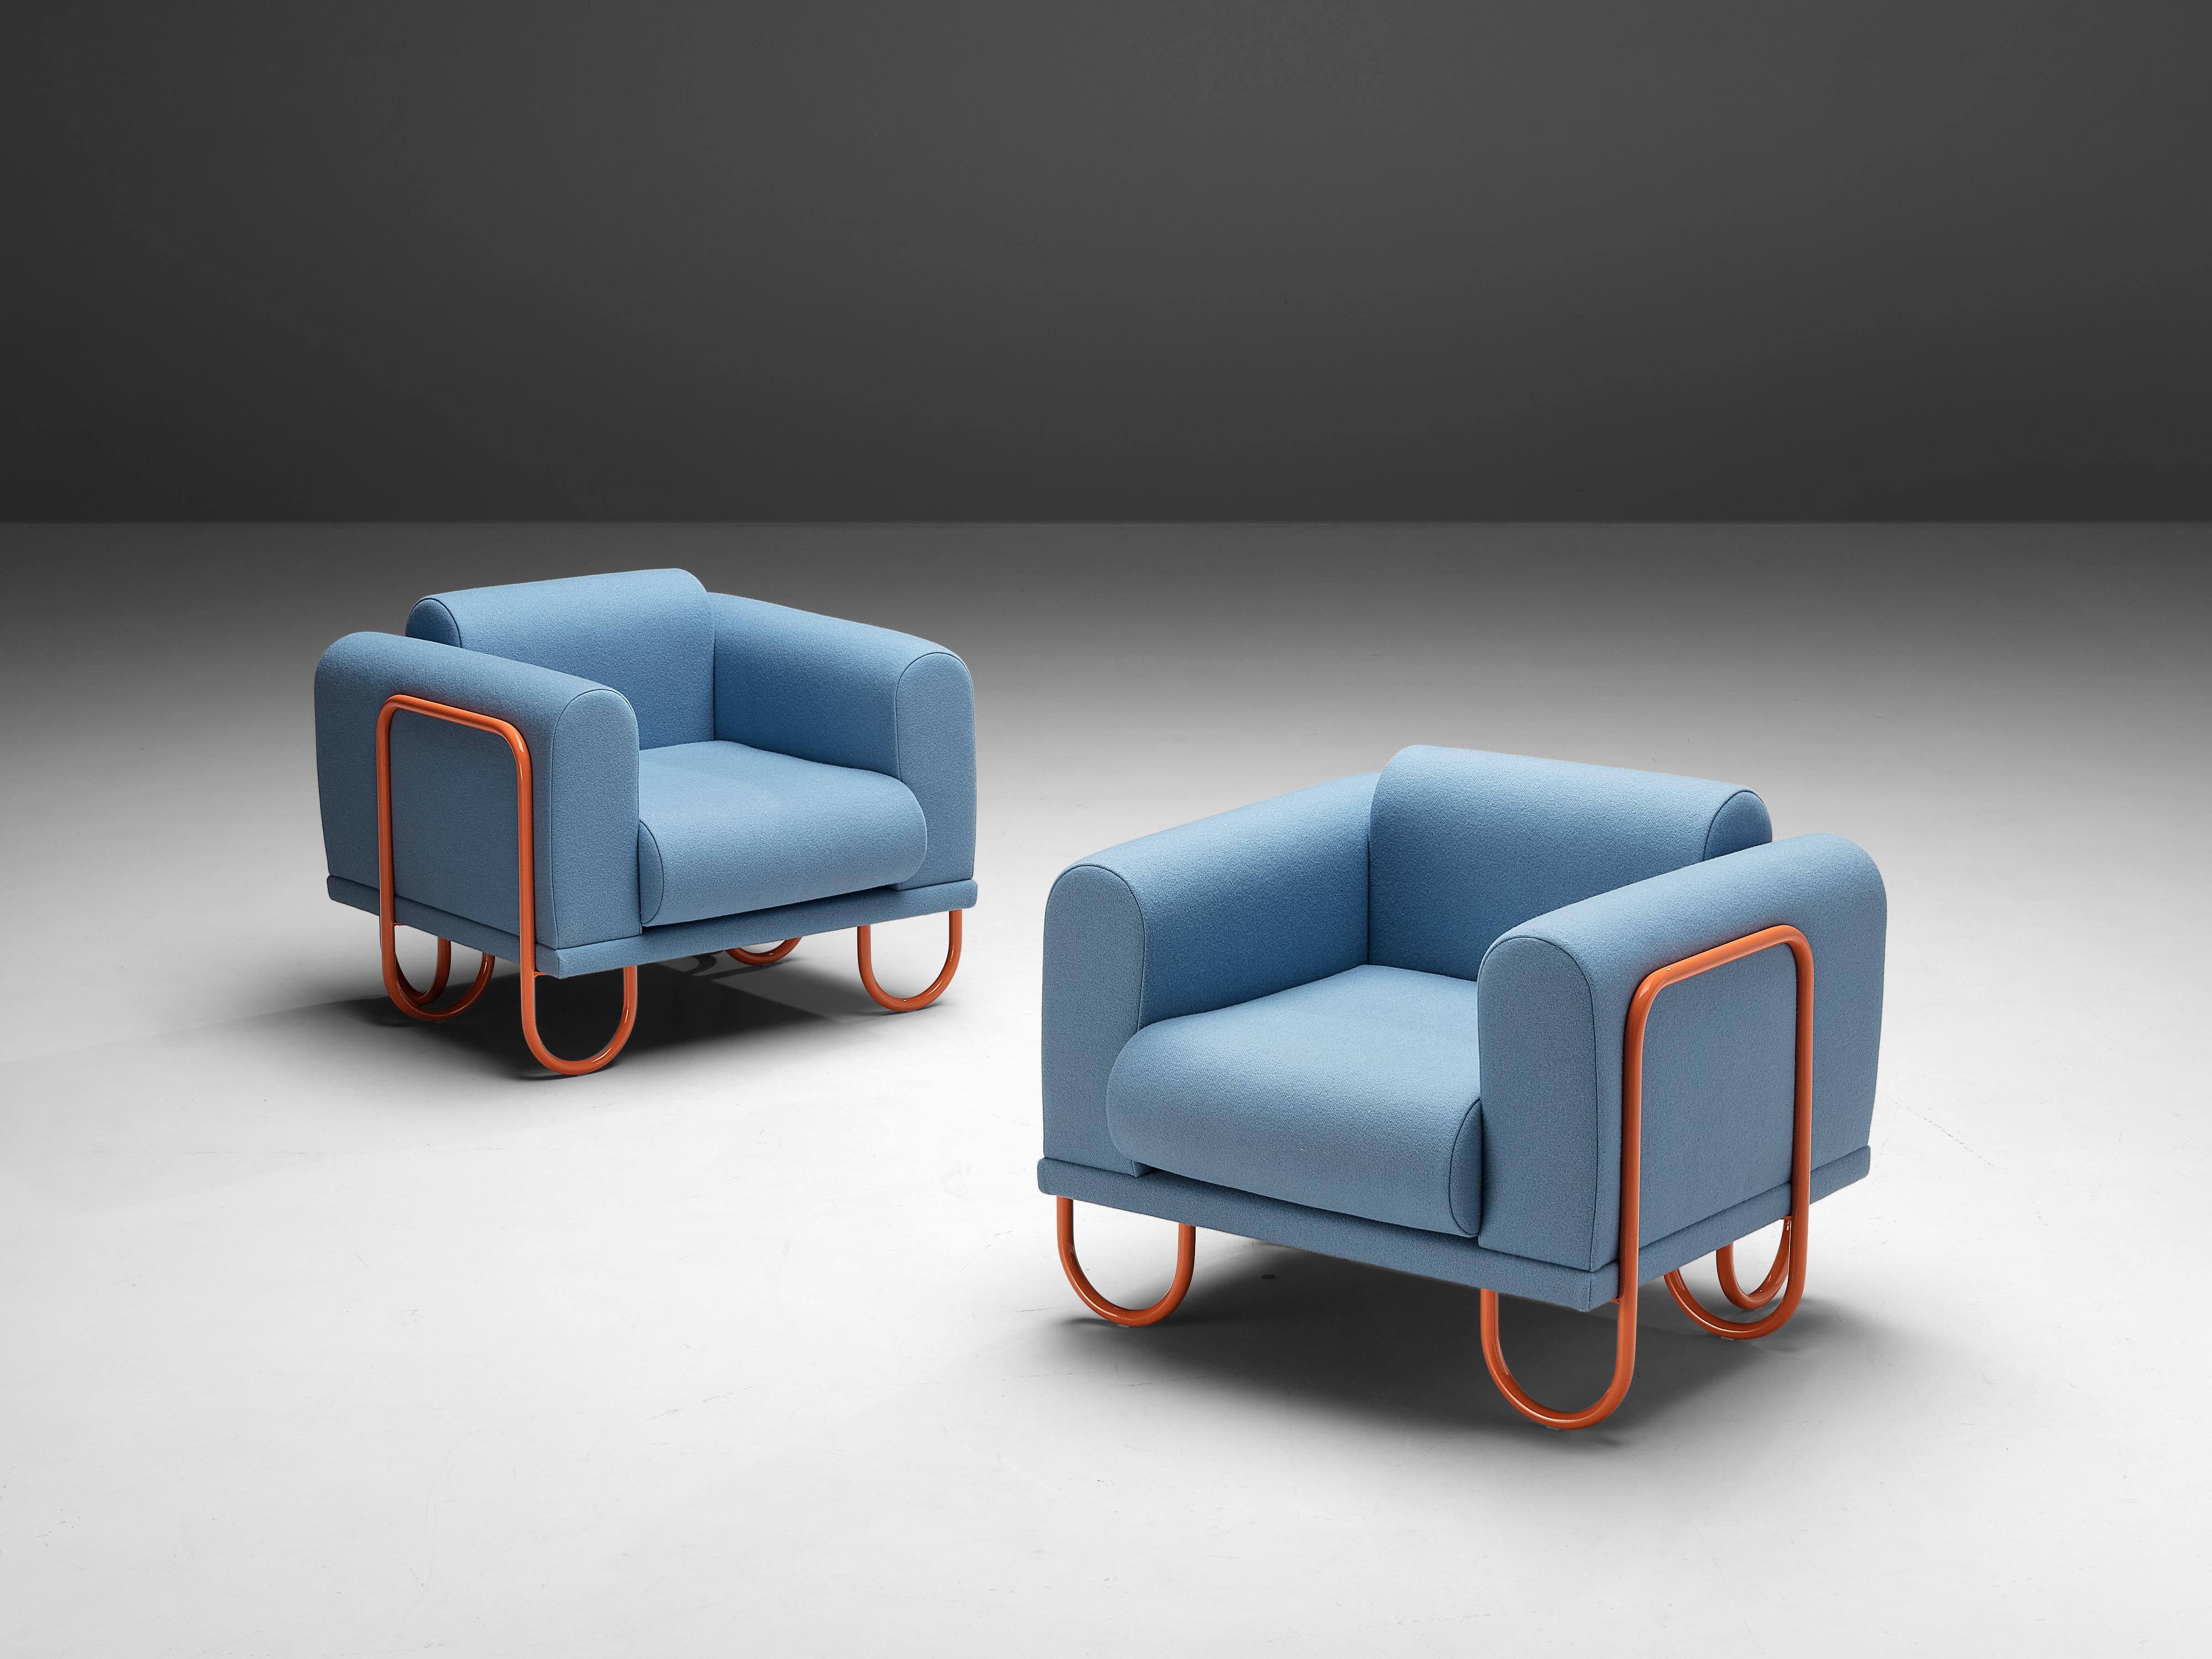 Byron Botker for Landes, lounge chairs, blue fabric, chrome-plated steel, United States, 1970s

A comfortable easy chair that features a curved, orange tubular frame. The frame appears to be an ongoing curved line, moving upwards to support the